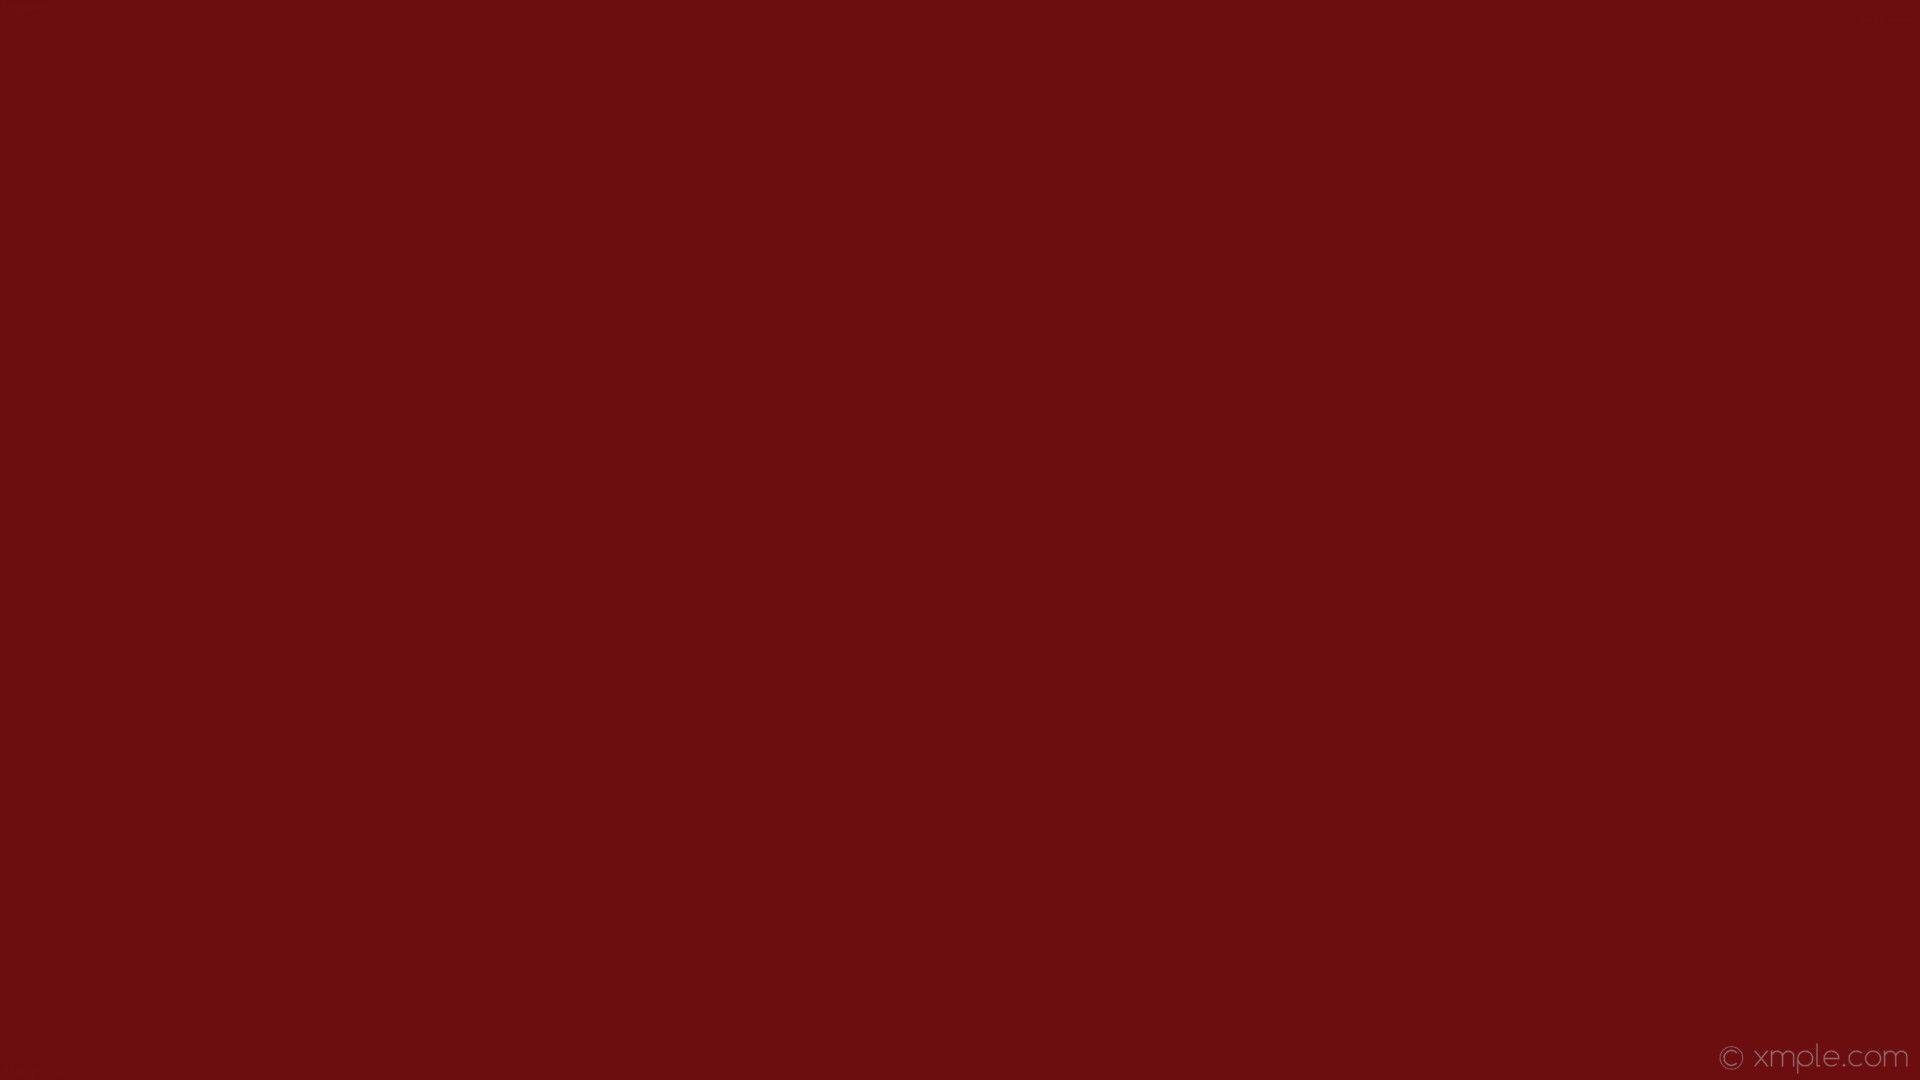 Dark Red Plain Wallpapers - Top Free Dark Red Plain Backgrounds